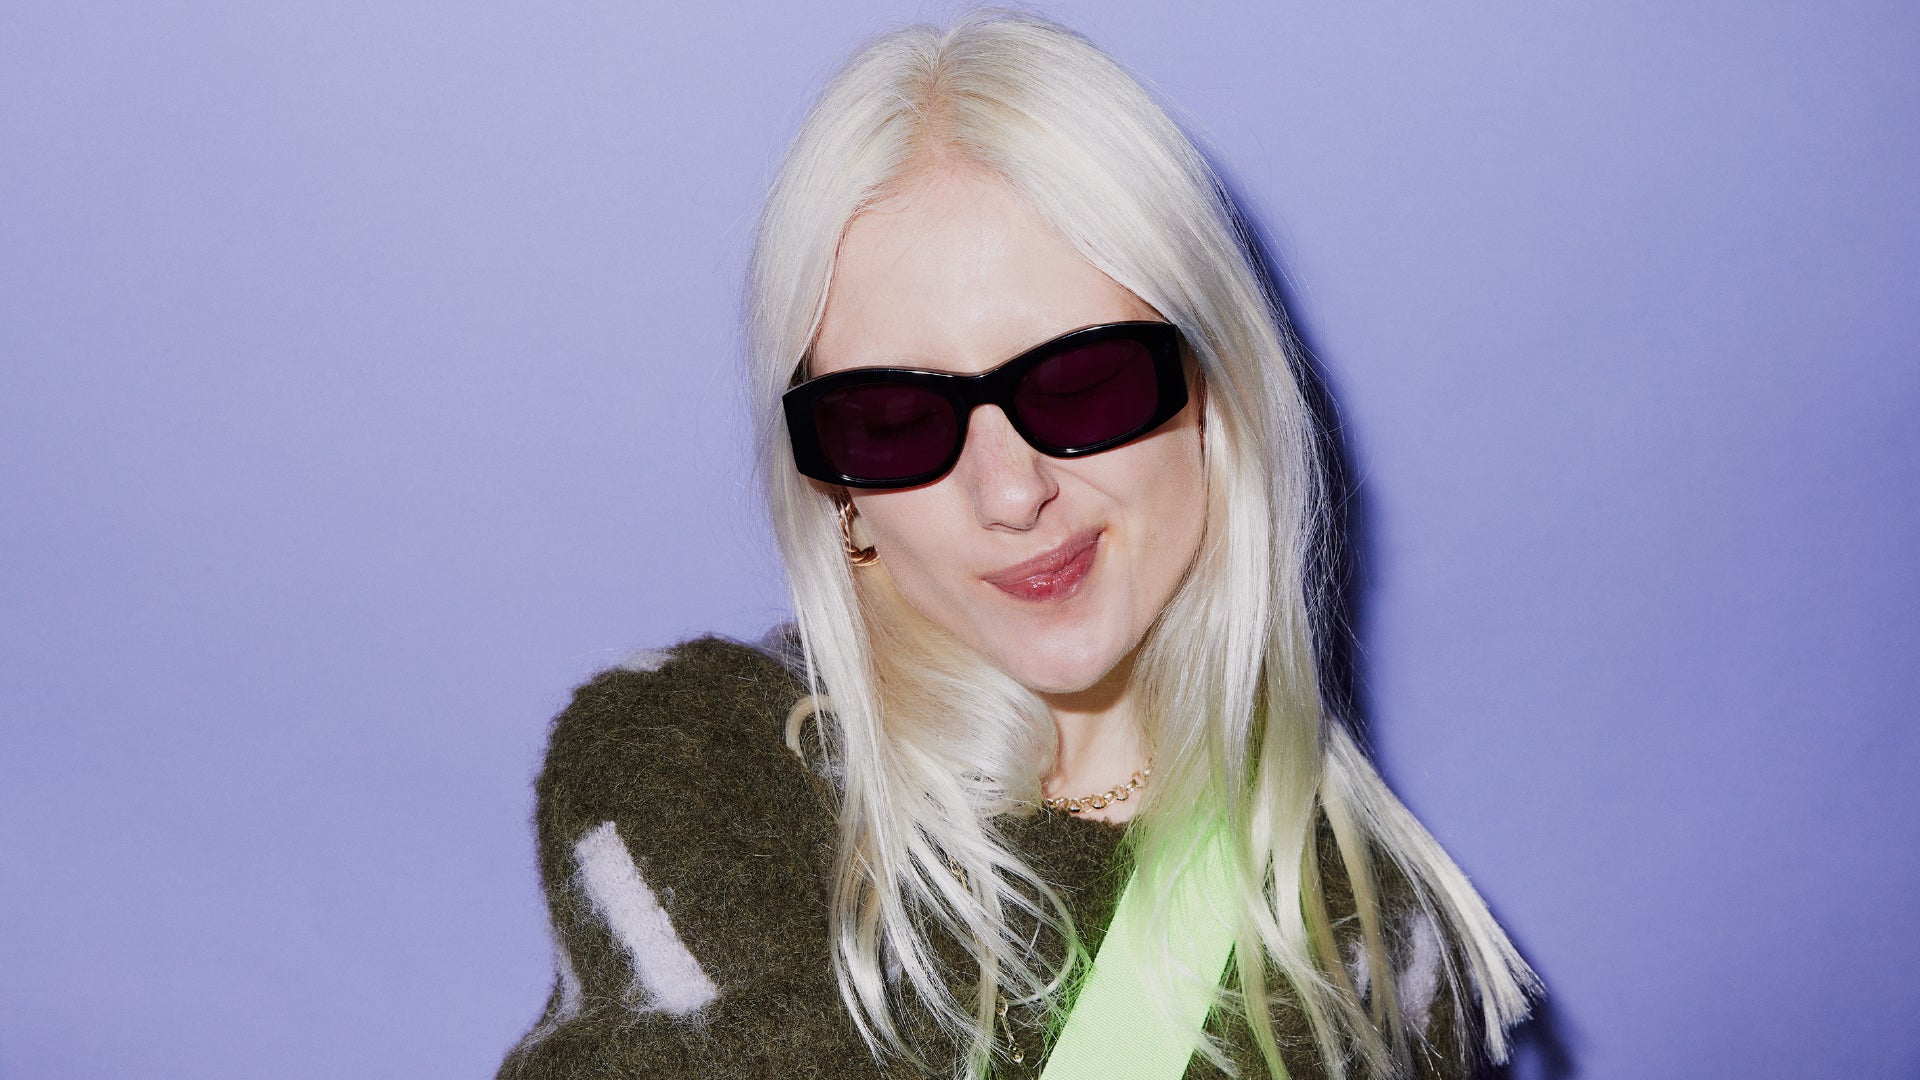 Are Radical Yes Sunglasses Better Than Botox?